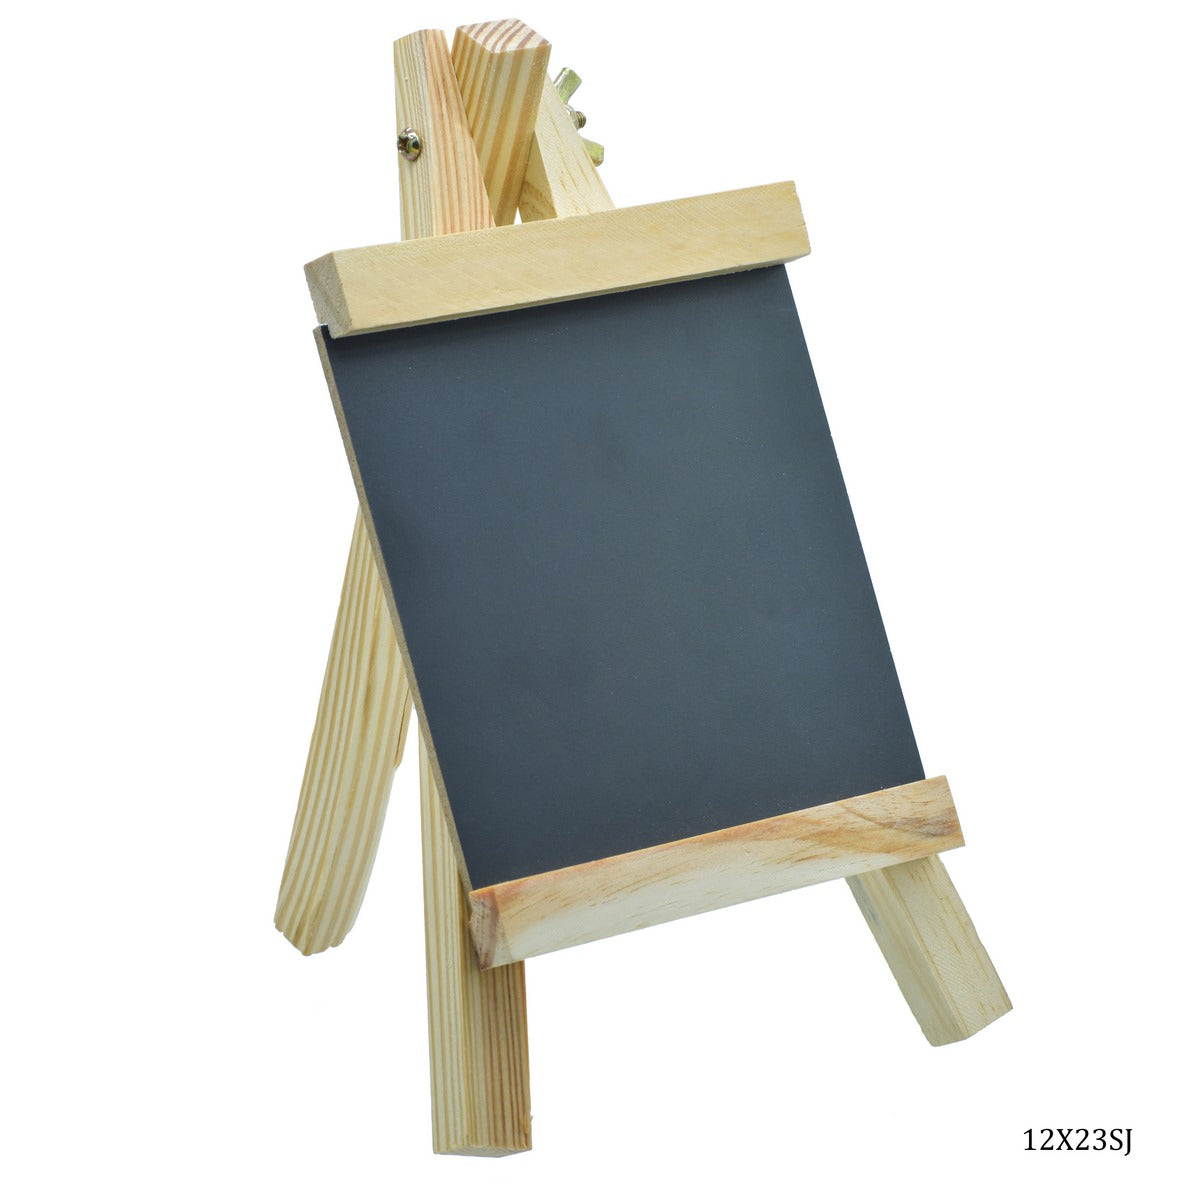 jags-mumbai Easel & Canvas Drawing Board With Easel Stand Black 12x23